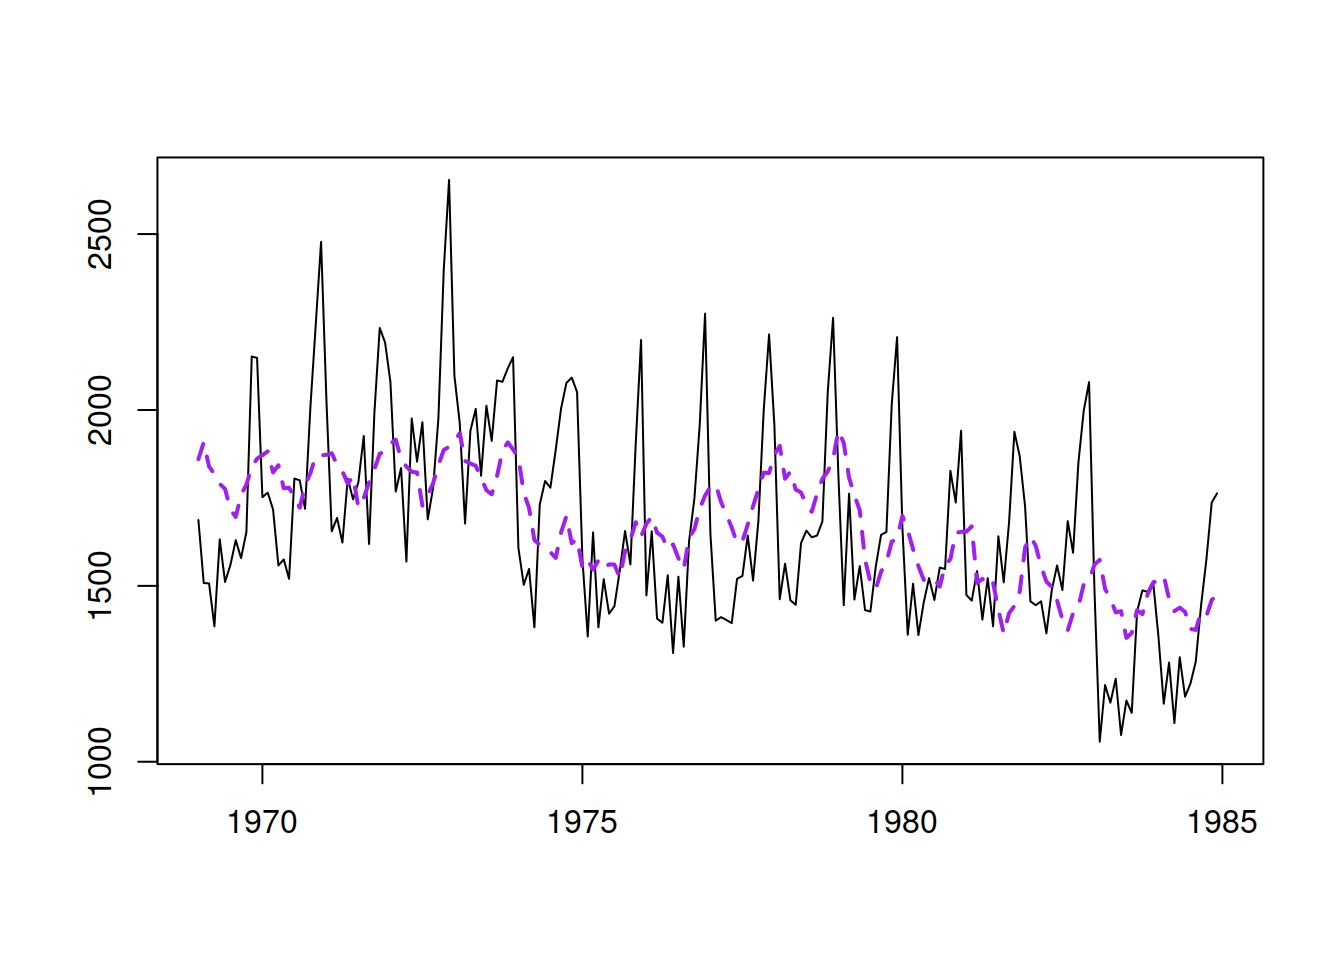 Basic regression model for the data on road casualties in Great Britain 1969–1984.